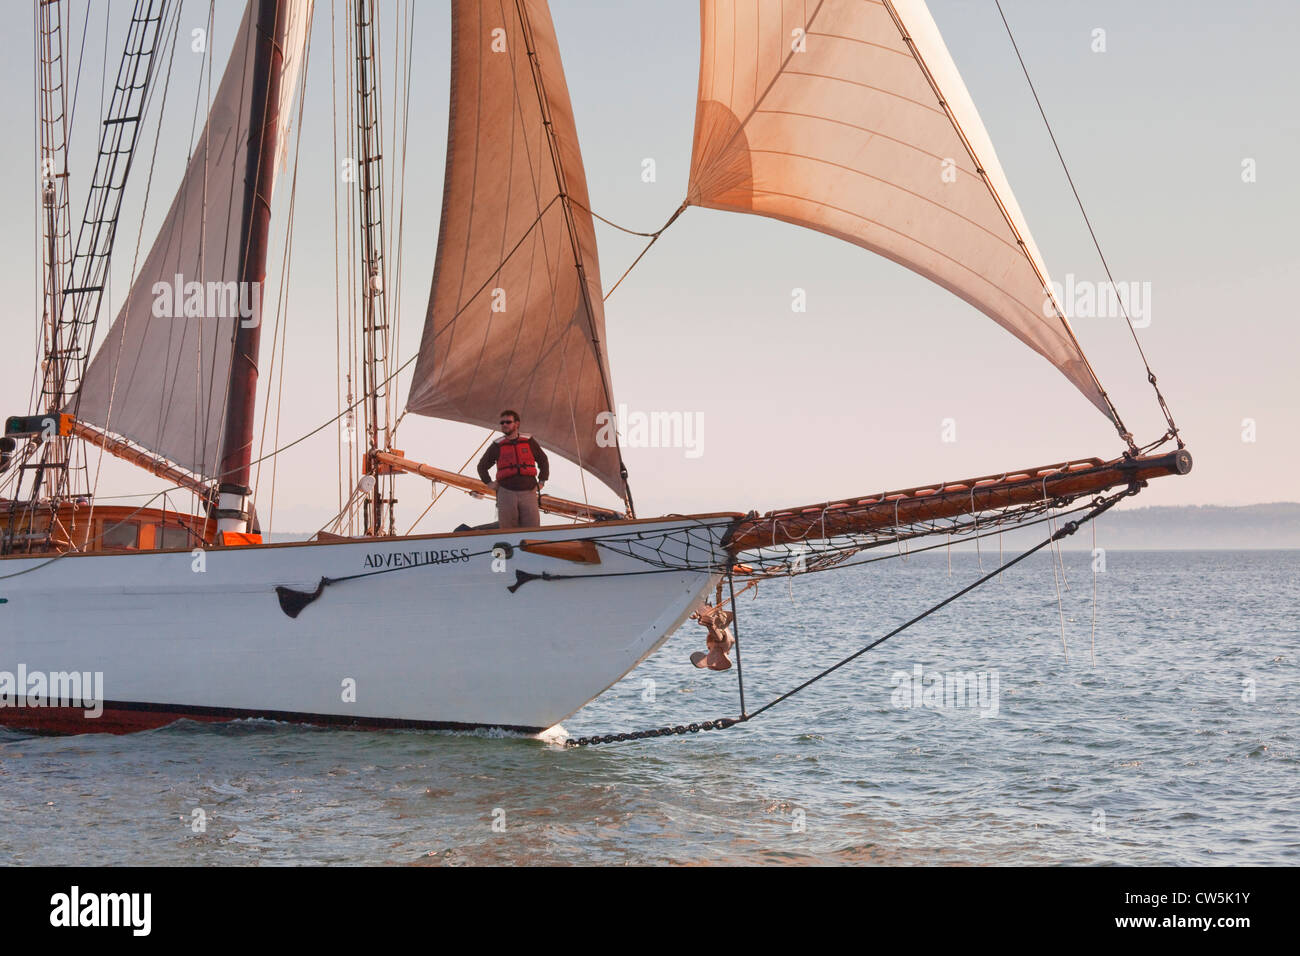 Sailboat in the ocean, Port Townsend, Washington State, USA Stock Photo